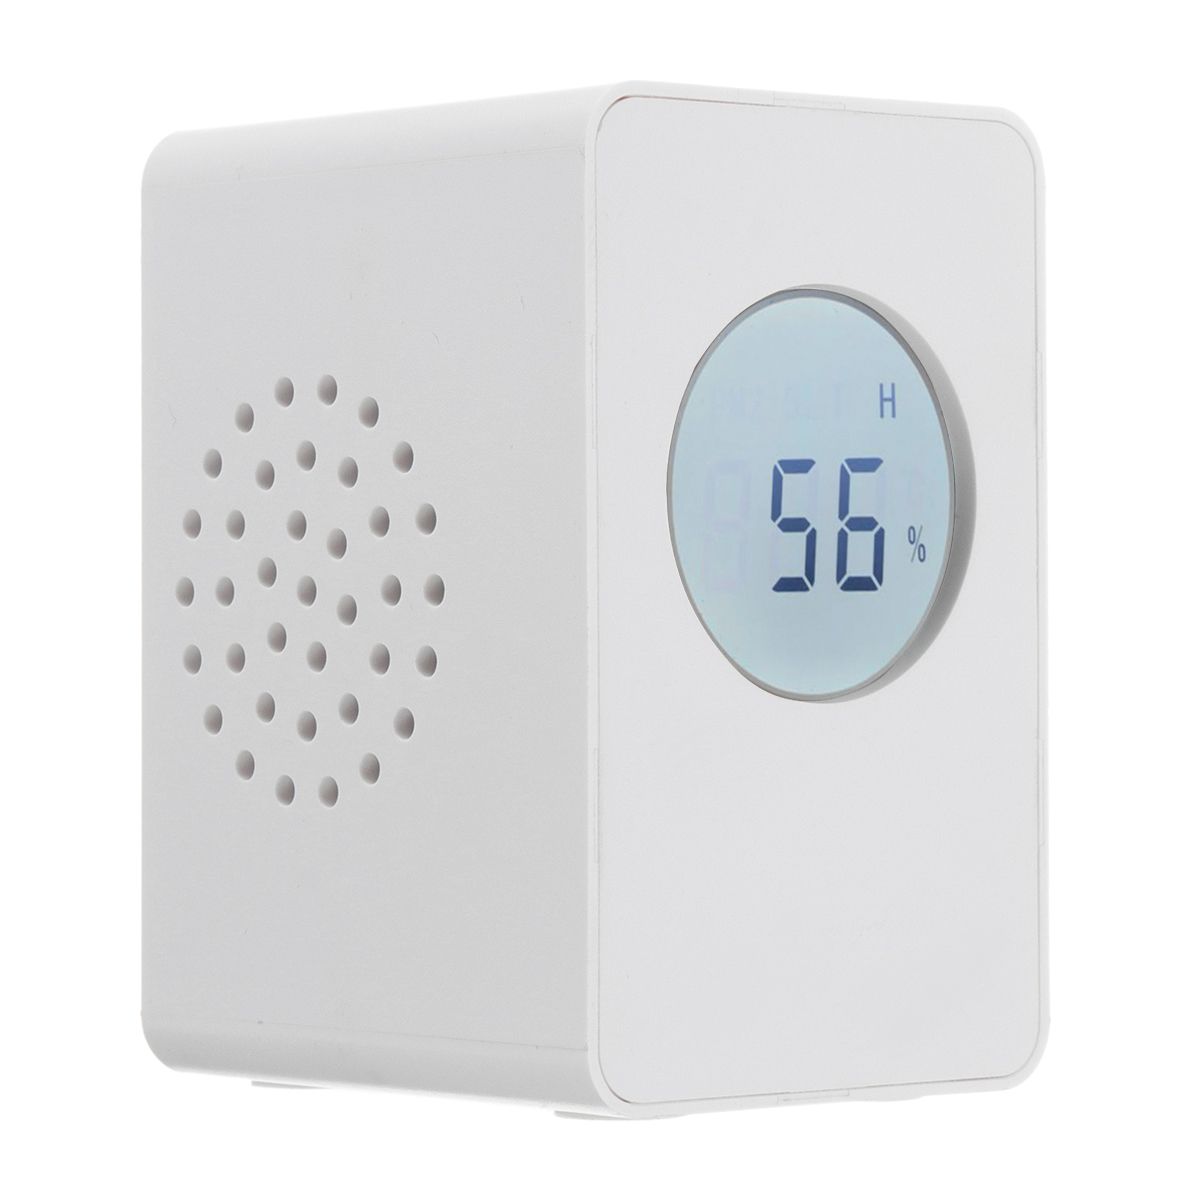 Portable-PM25-Temperature-Humidy-Detector-Air-Quality-Tester-Meter-Monitor-Home-1469905